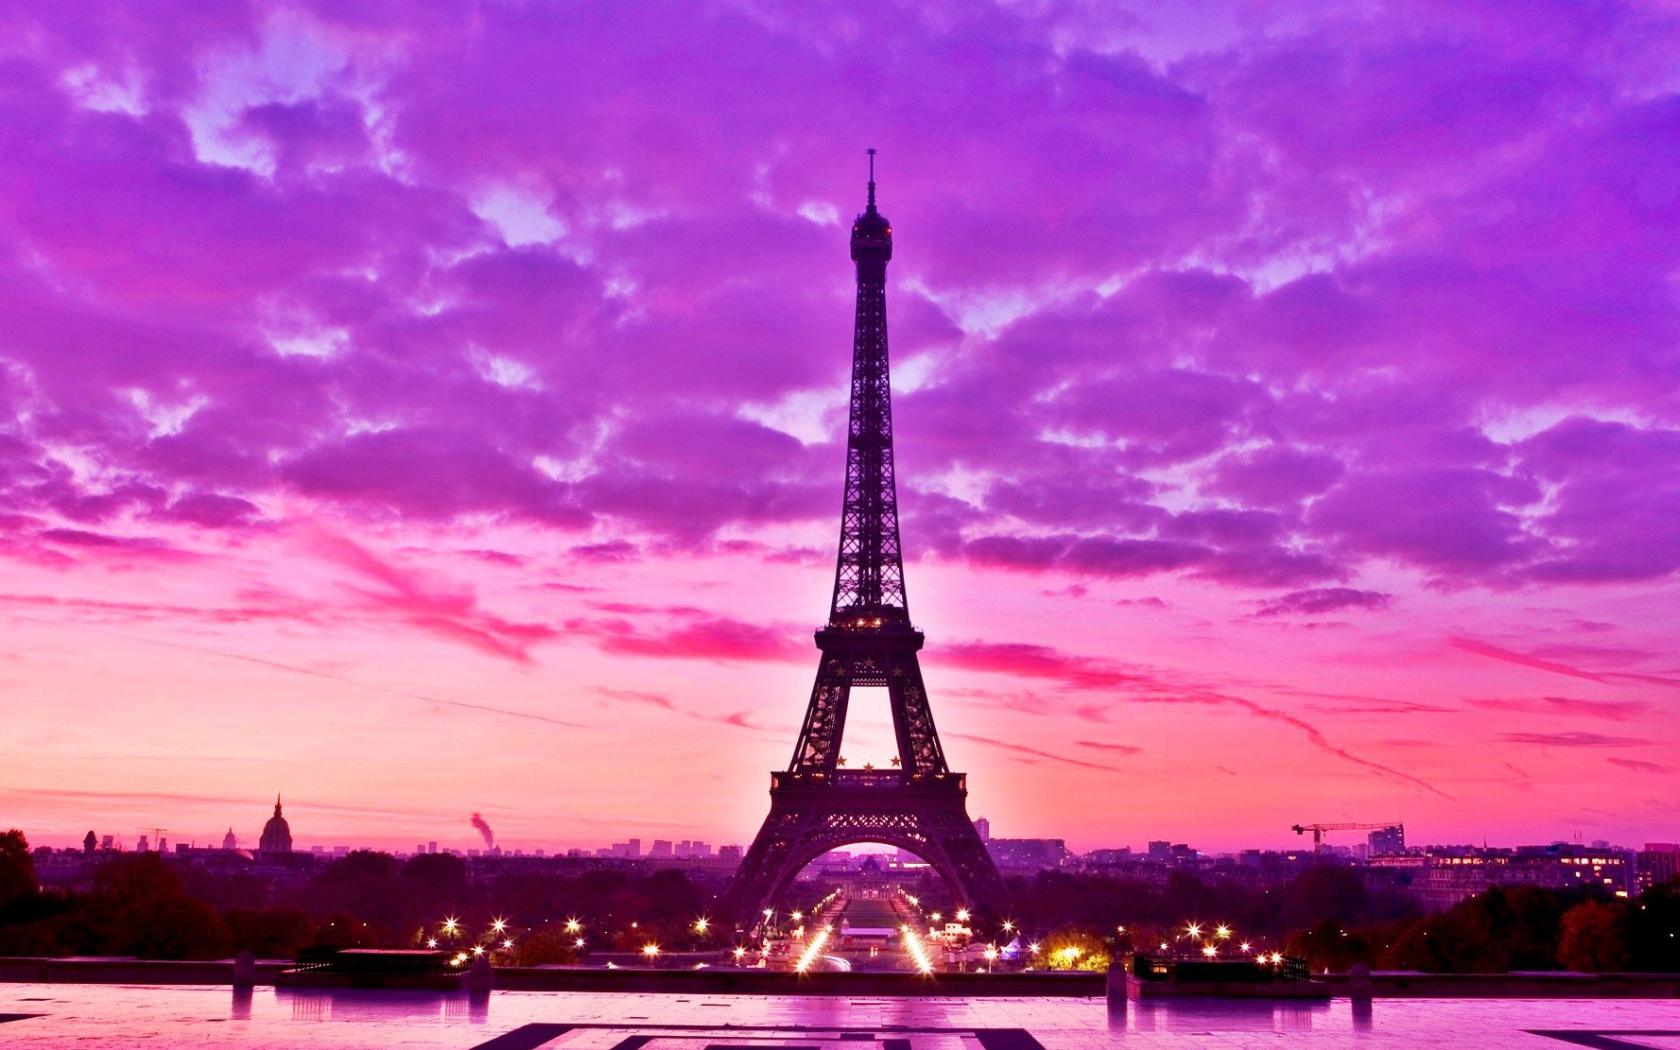 Bright picture of the Eiffel Tower